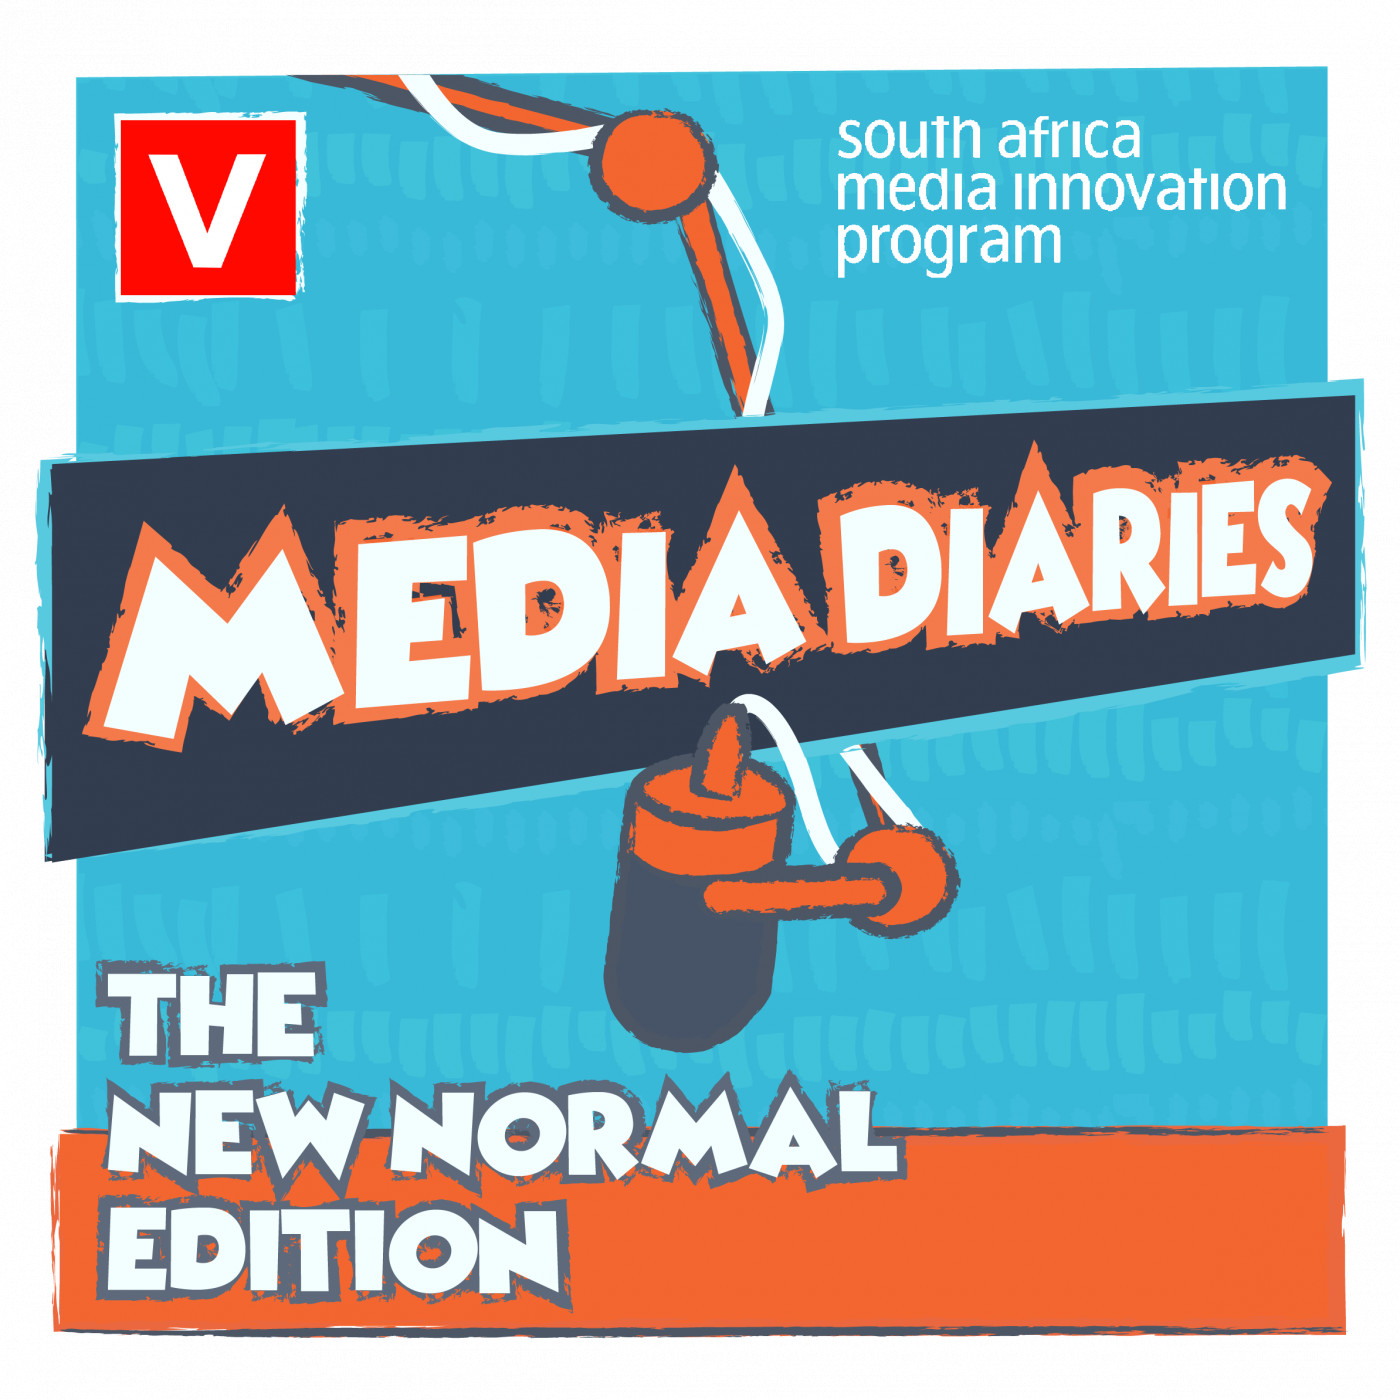 S2 E2: The Daily Vox and Youth Centred News